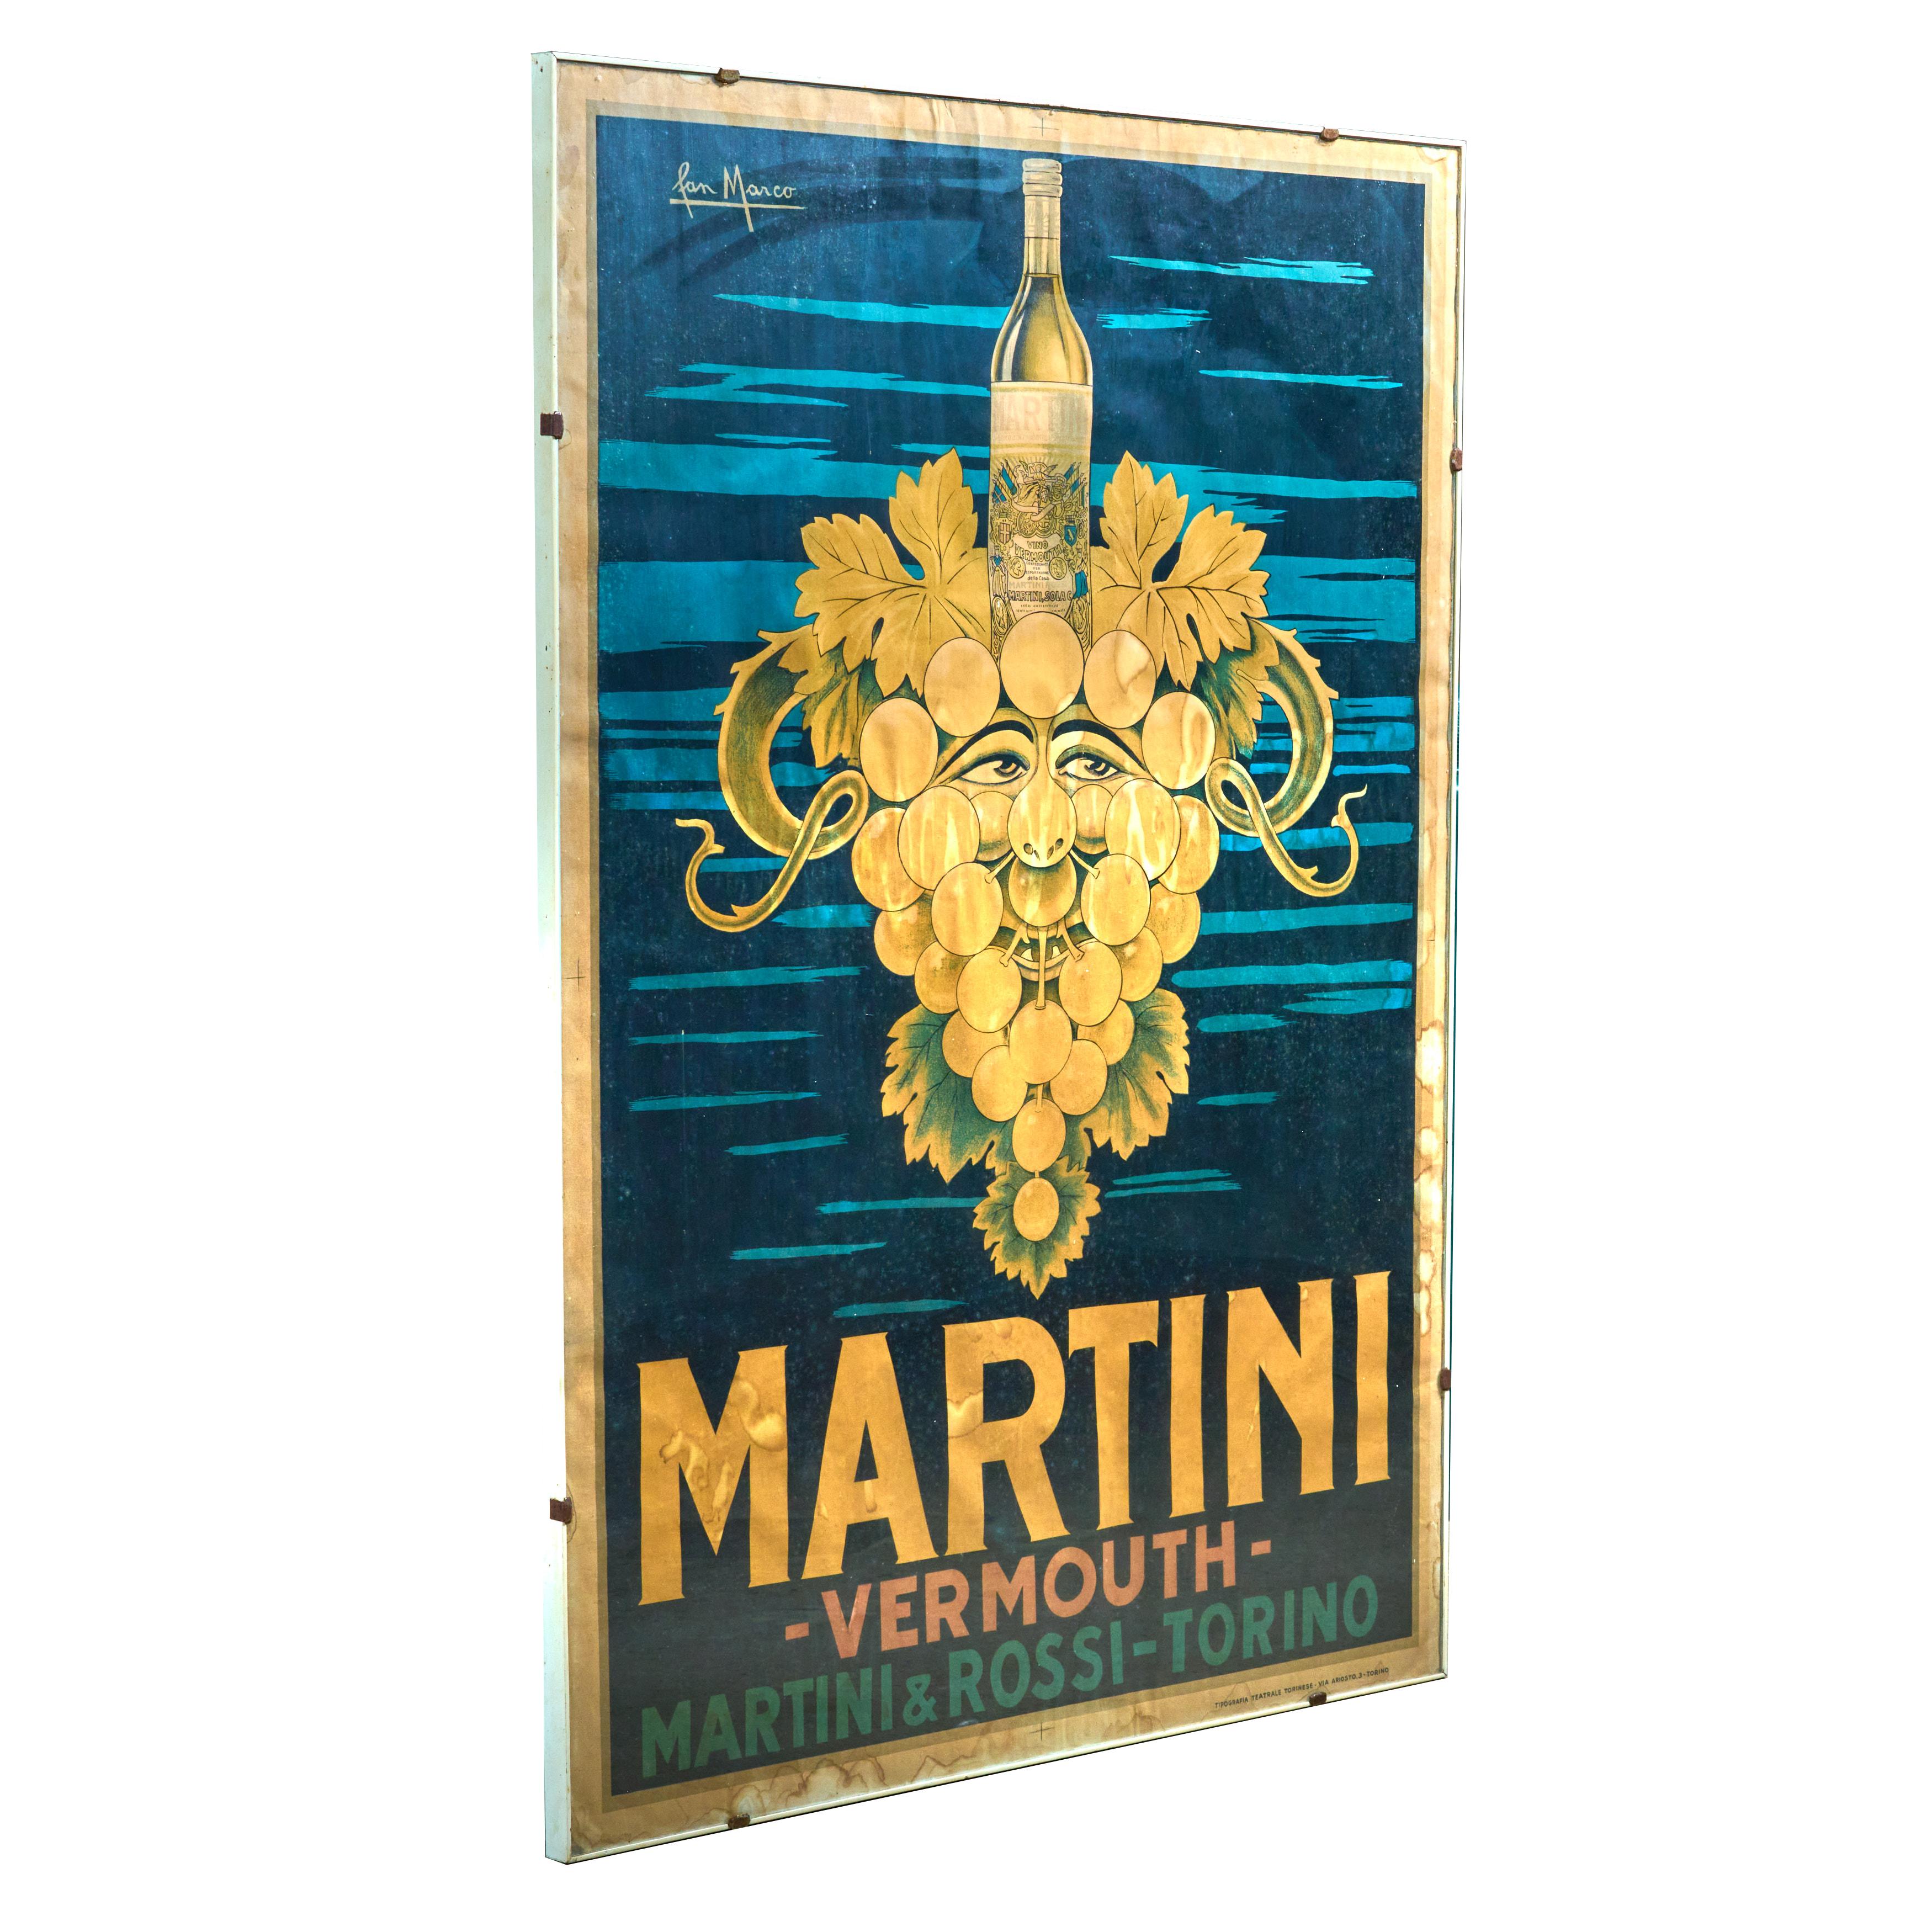 Original framed advertising poster for Martini and Rossi Vermouth. Signed by artist. Wonderful graphics and color. Great condition. 

